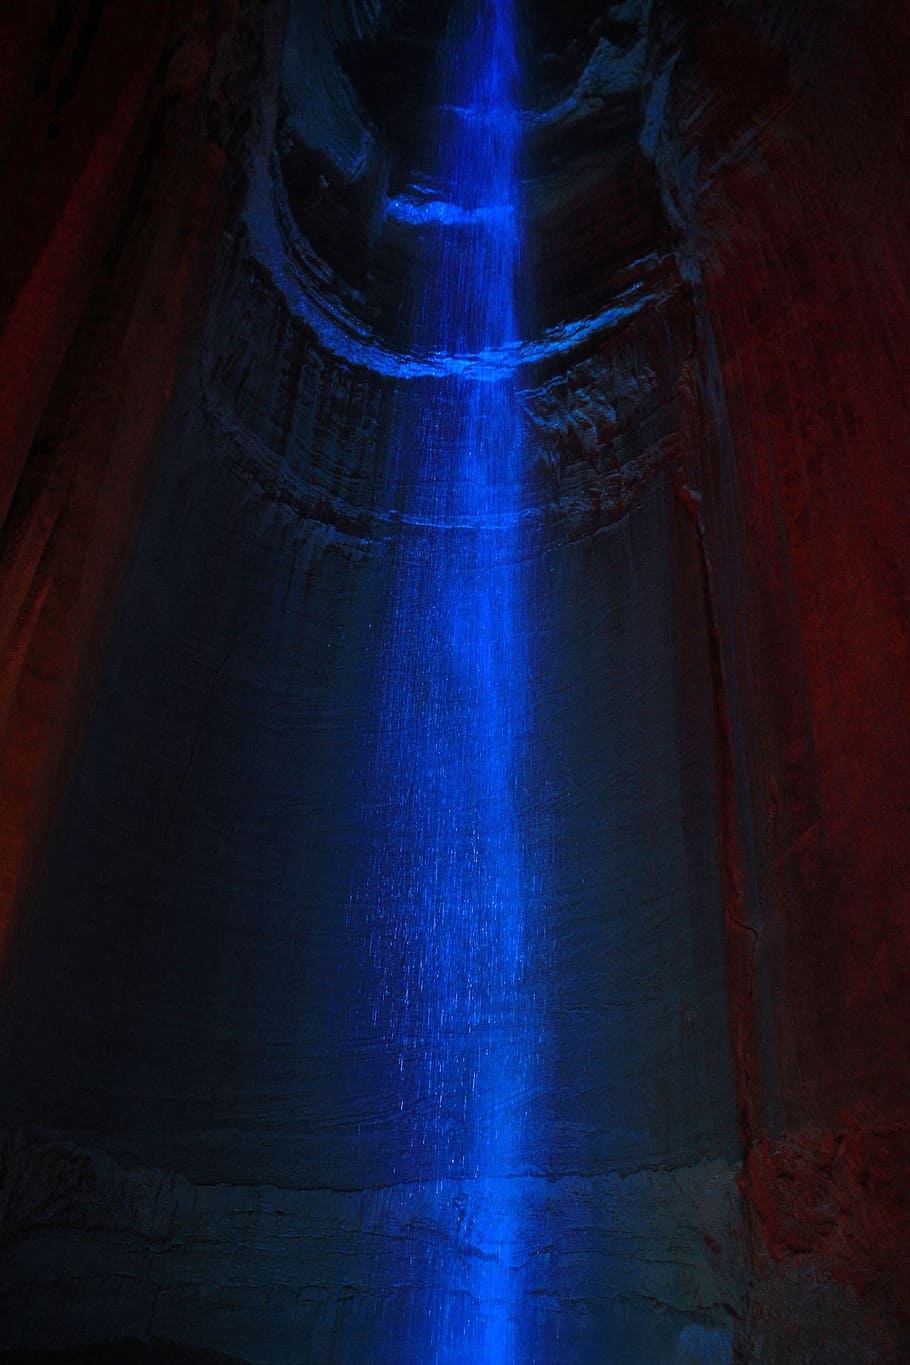 ruby falls, waterfall, tennessee, blue, usa, cave, cavern, nature, rock, erosion